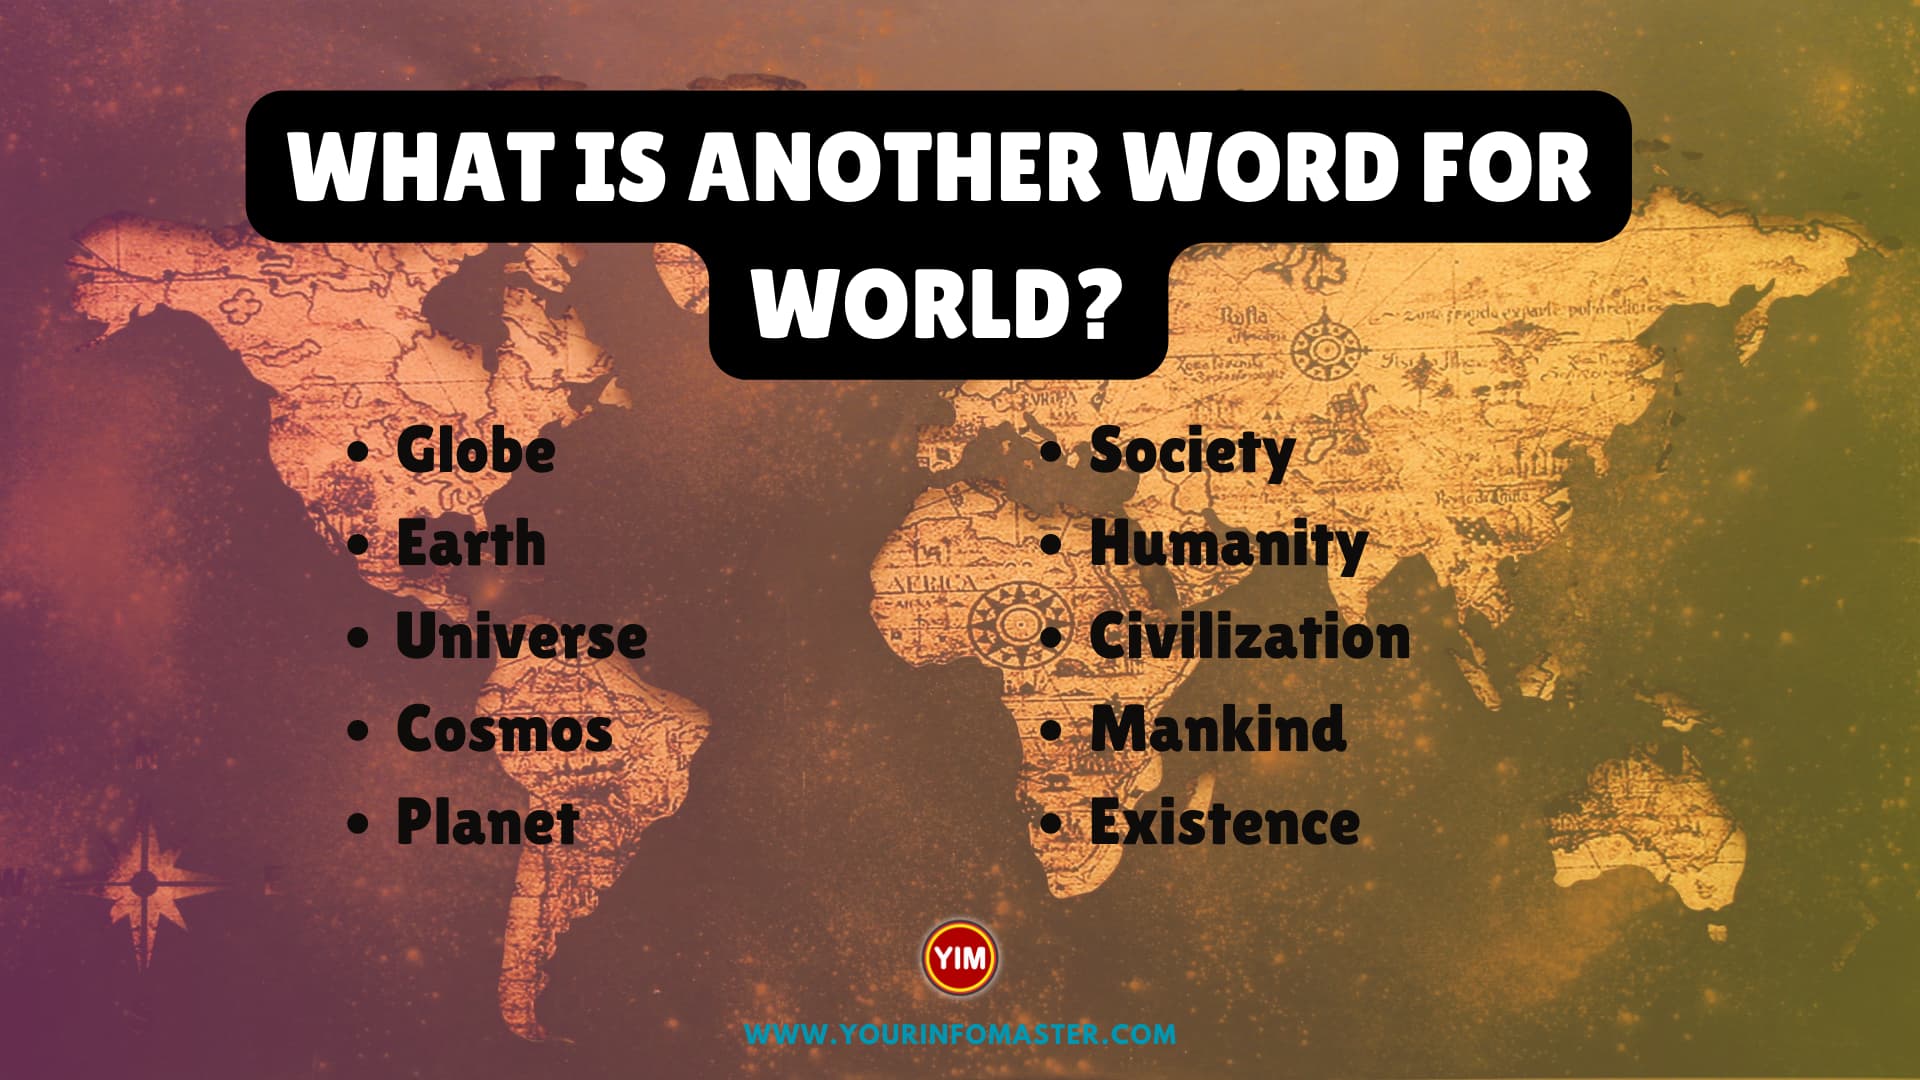 What is another word for World